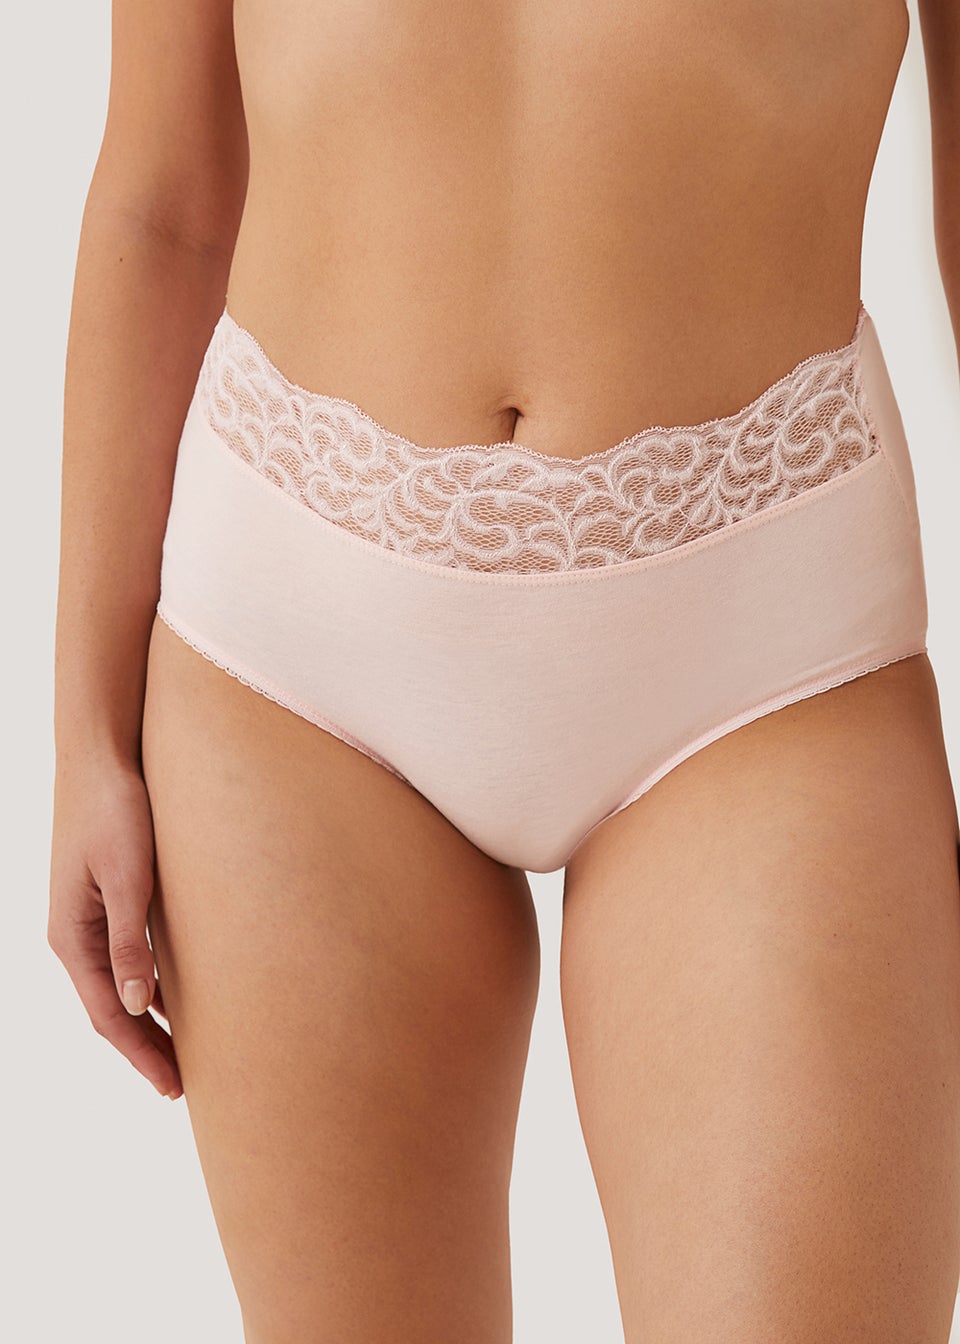 5 Pack Lace Trim Full Knickers